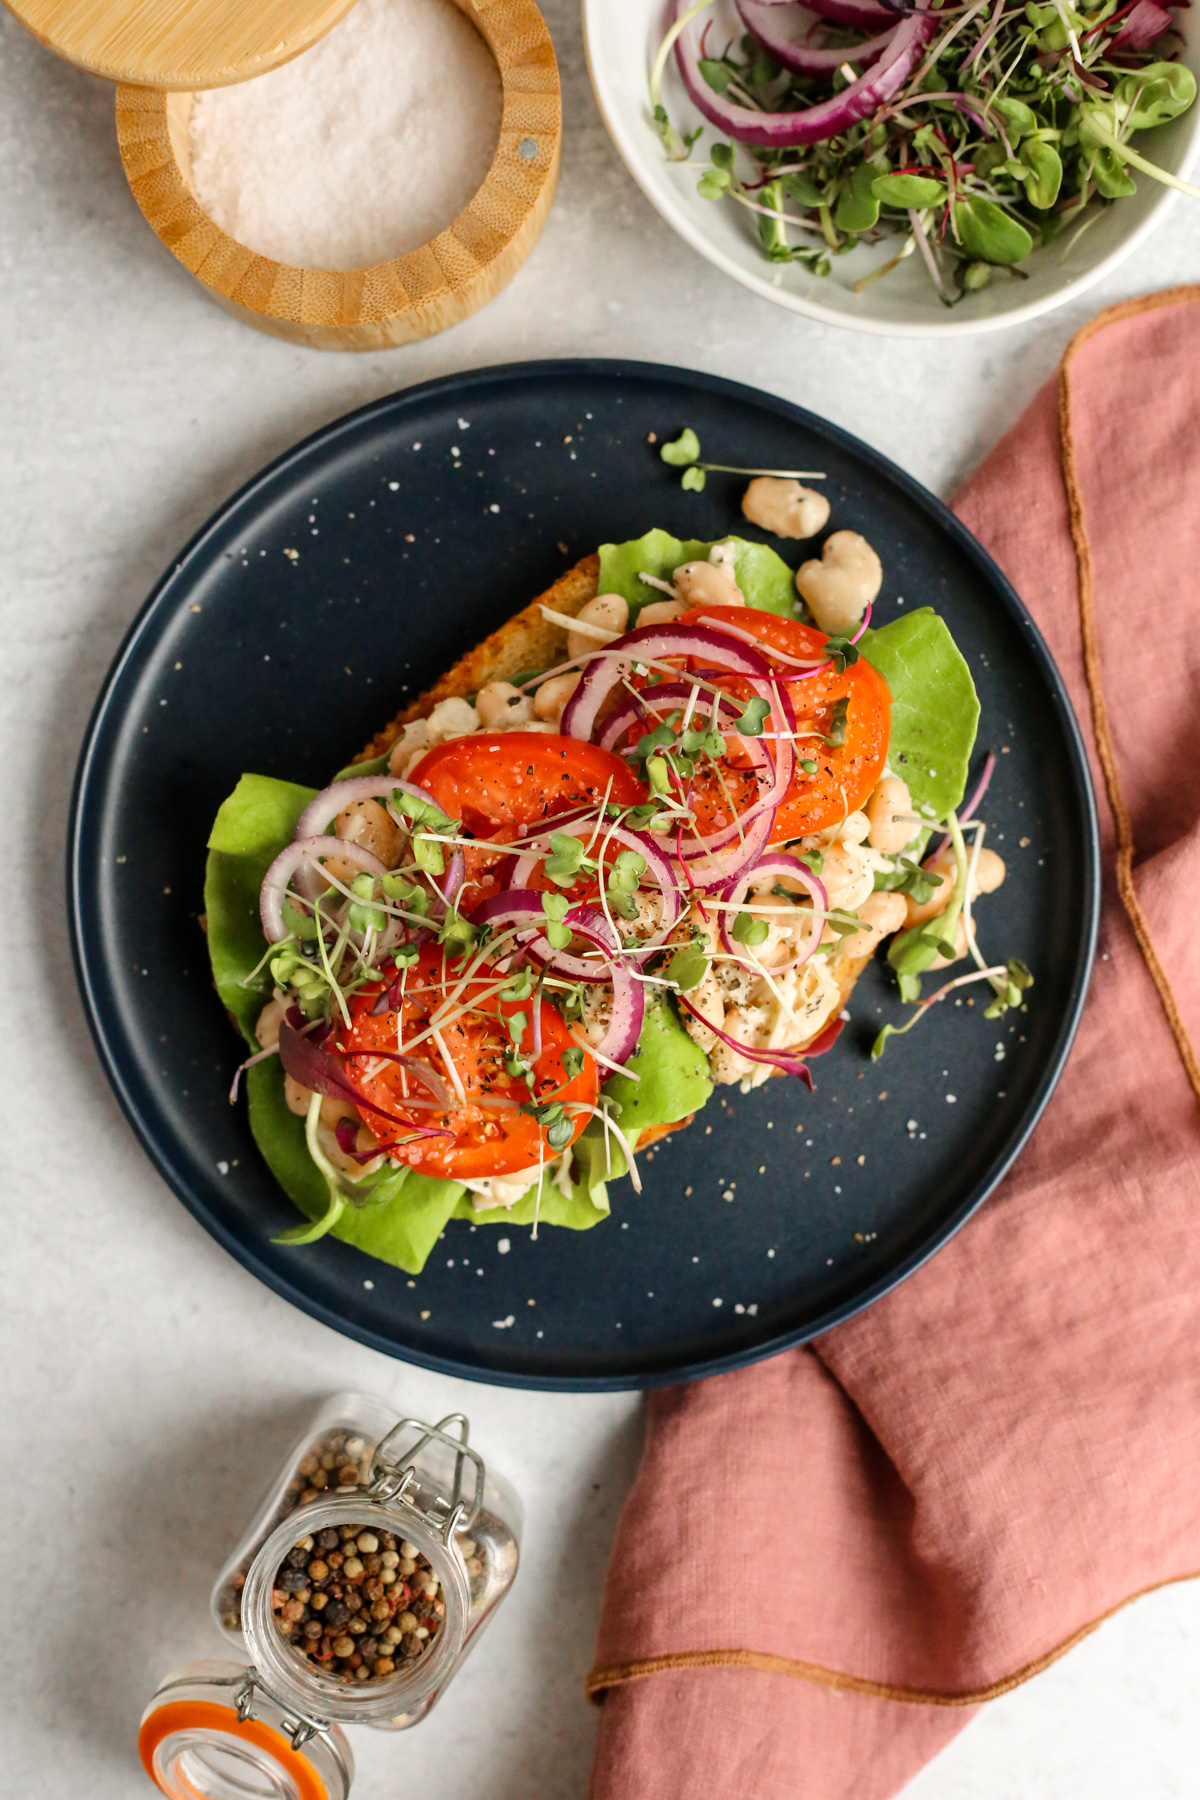 Overhead view of a Caesar Beans on Toast recipe, with one slice of toasted bread topped with lettuce, caesar beans, sliced tomatoes, red onions, and garnish on a navy blue ceramic plate on a kitchen countertop